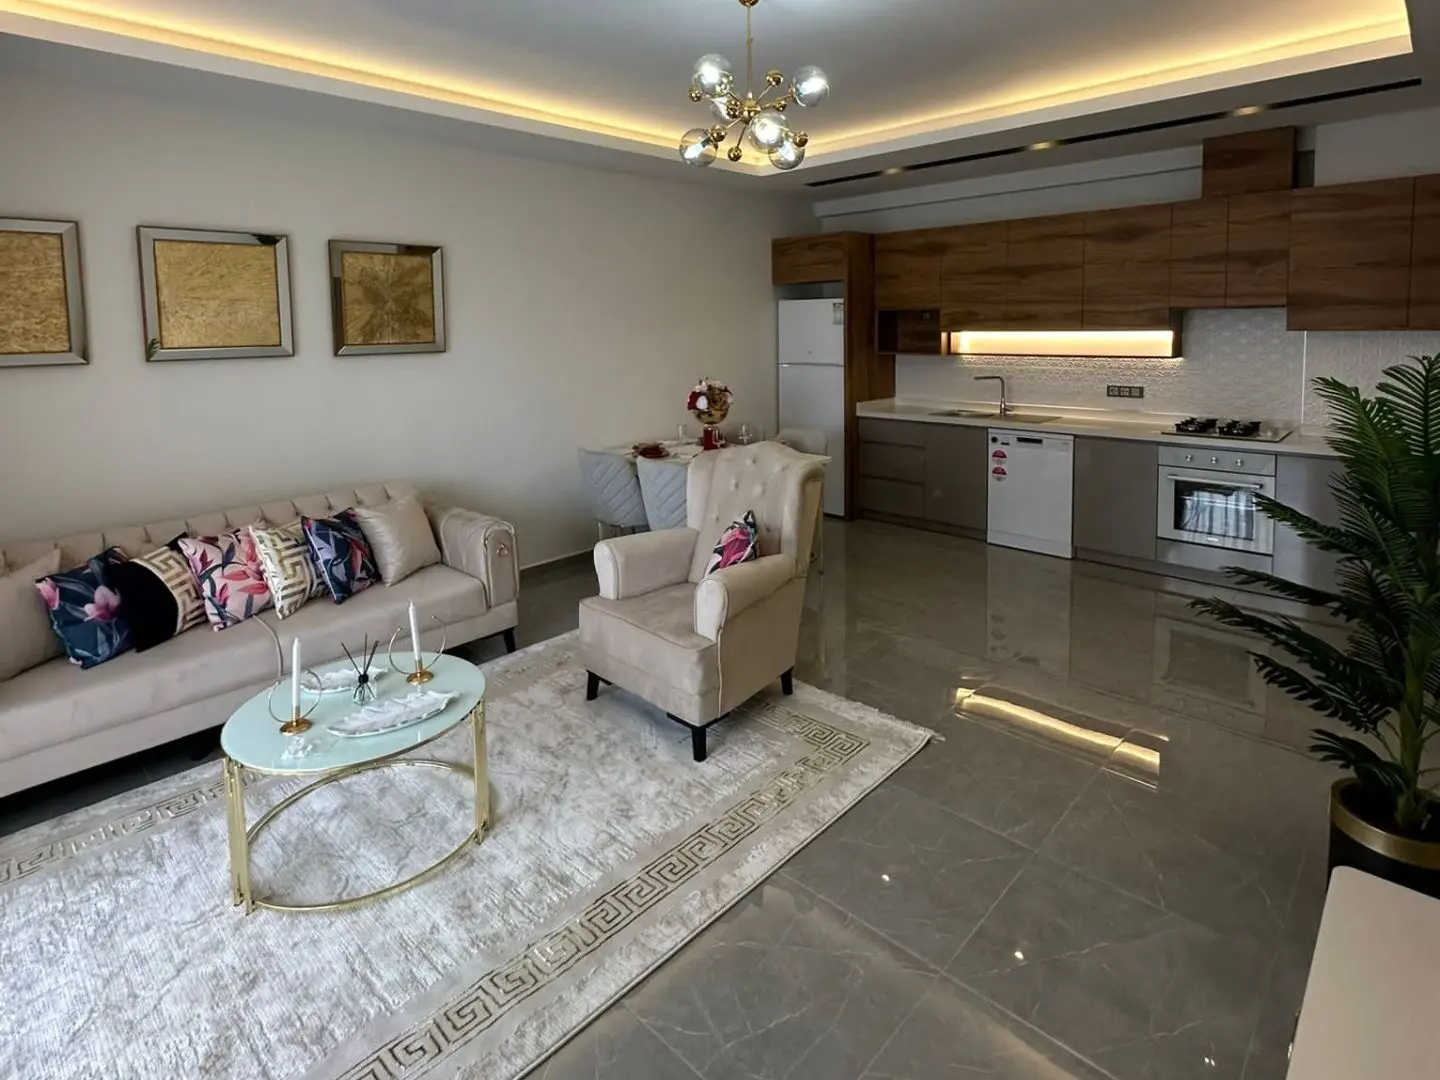 FULLY FURNISHED 1+1 FLAT IN MAHMUTLAR IN A FULL ACTIVITY SITE